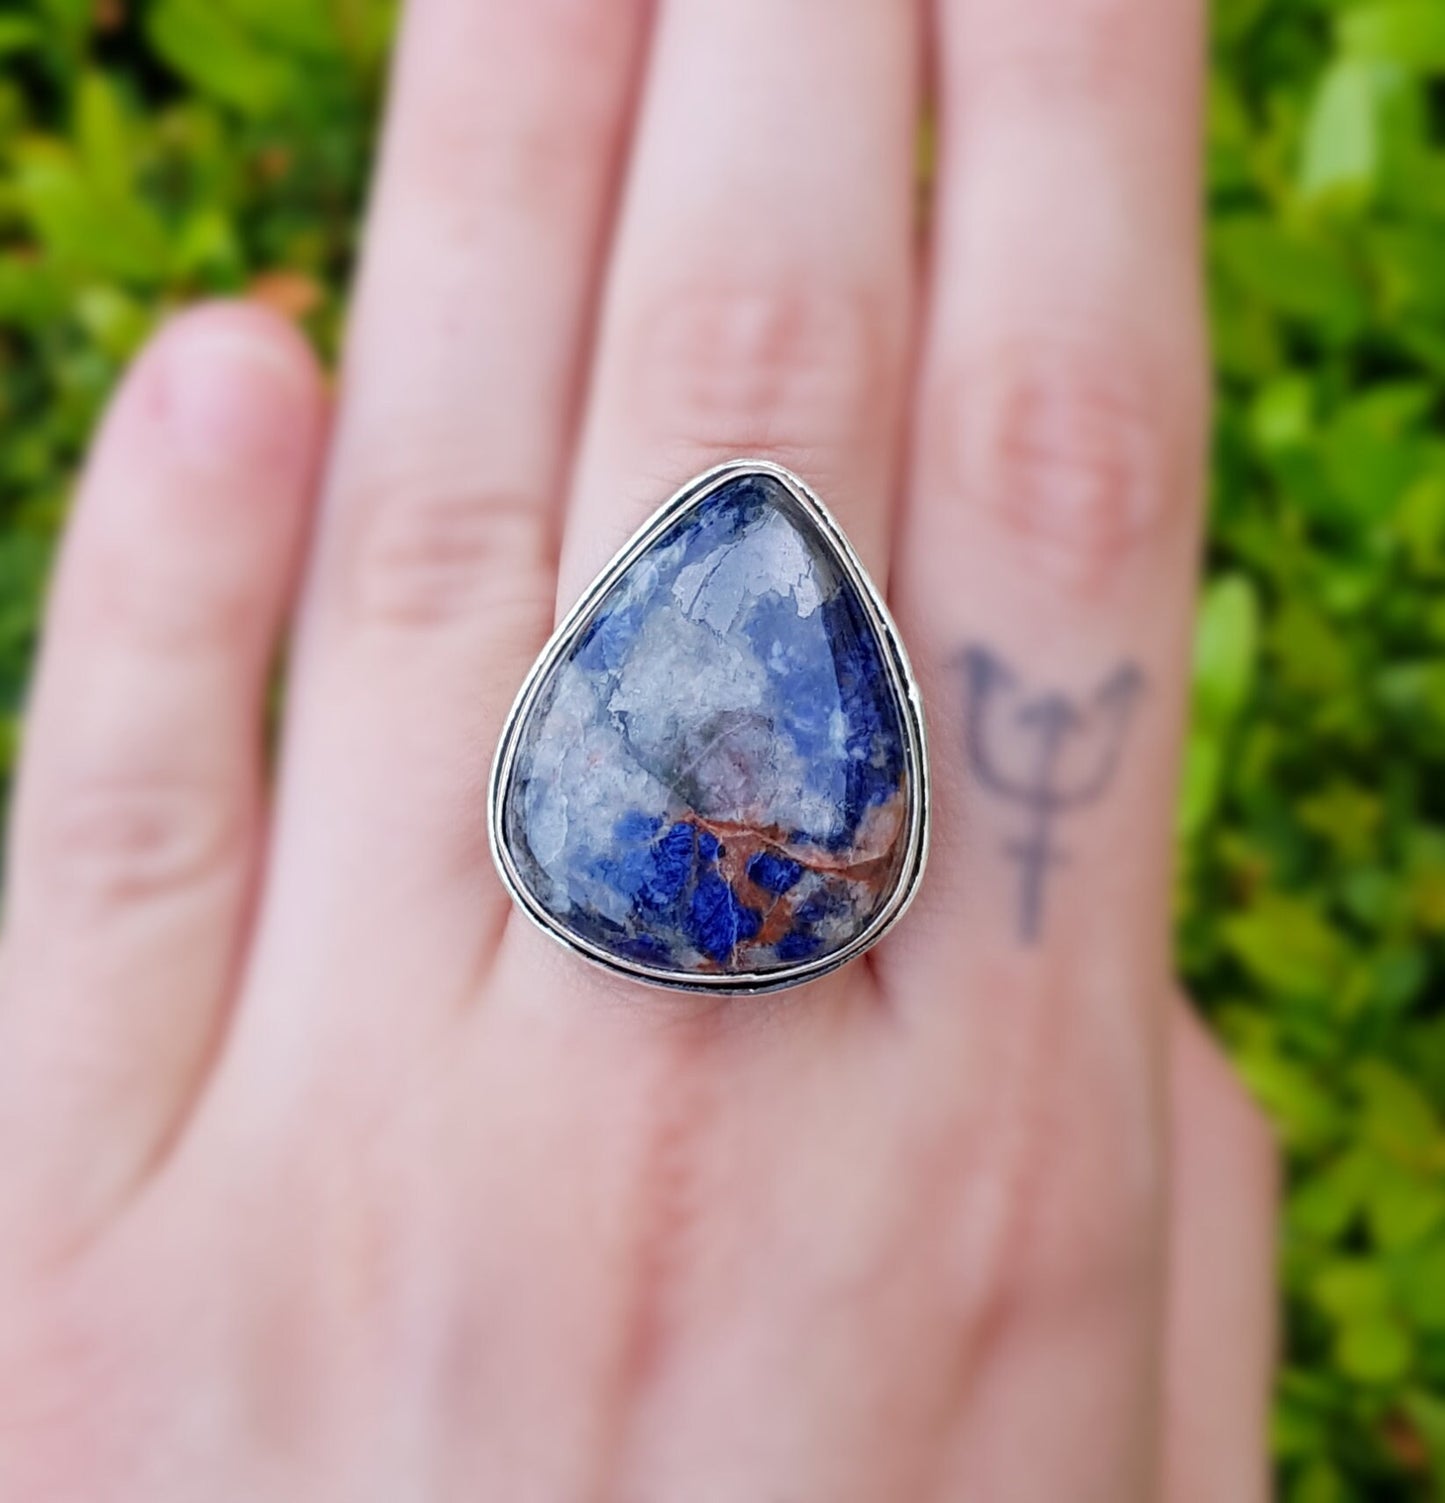 Sodalite Statement Ring In Sterling Silver Size US 7 1/2 Gemstone Ring Boho Ring Unique Jewelry Ethnic Ring GypsyJewelry